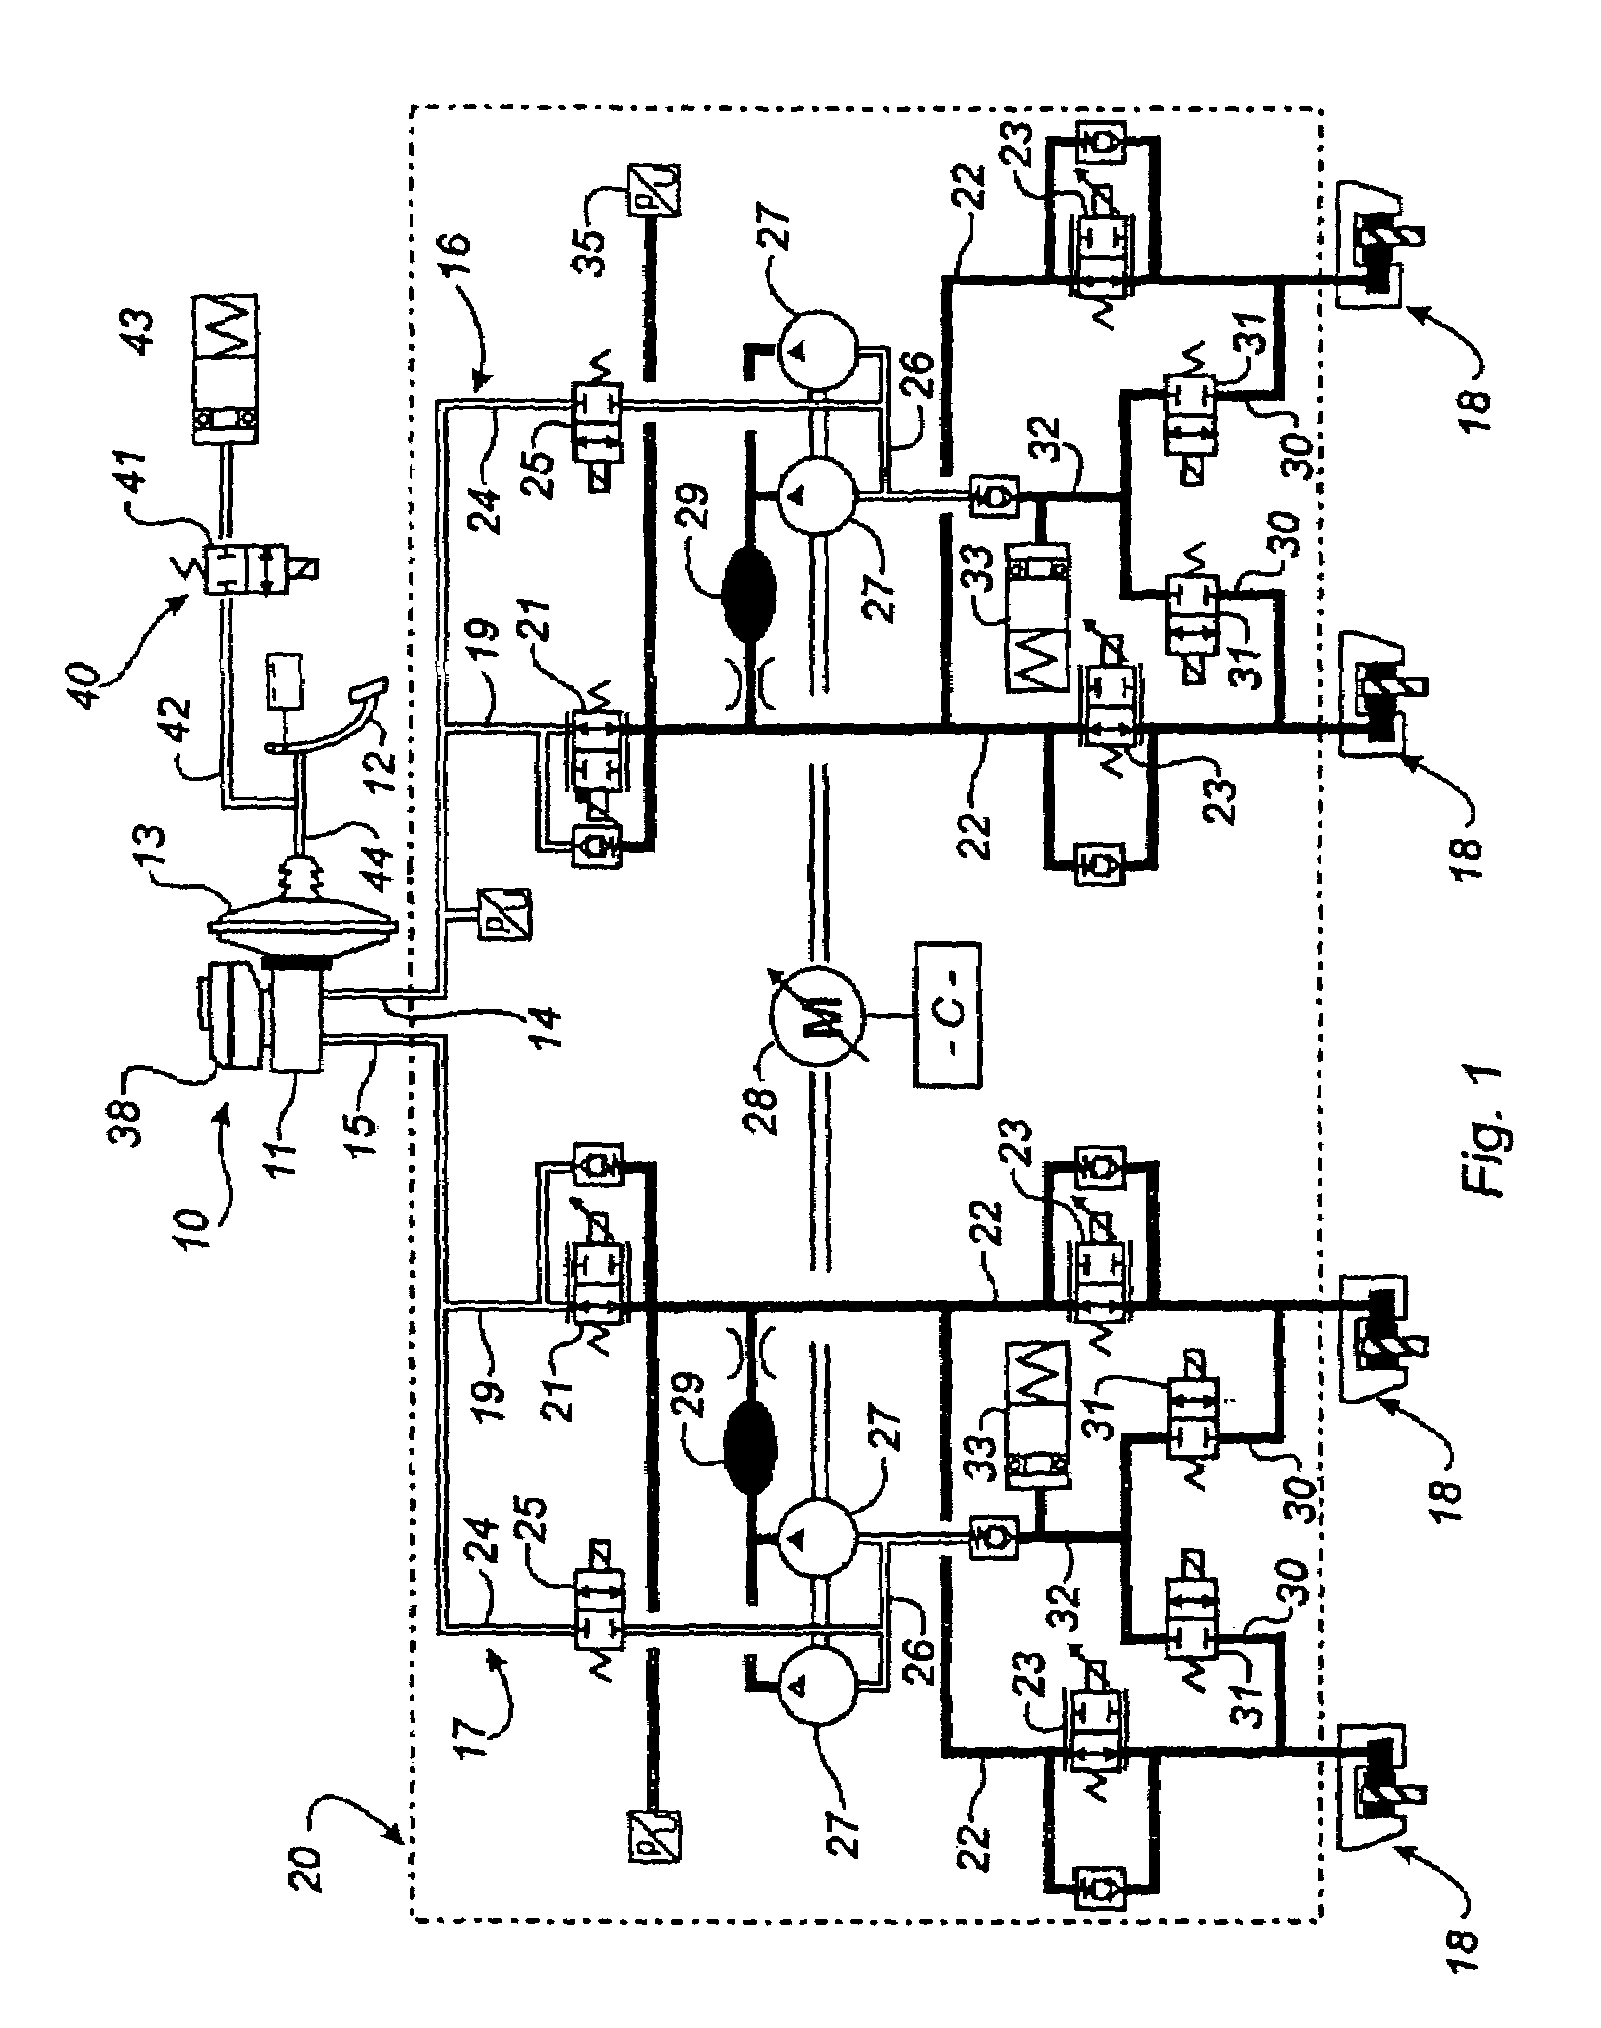 Braking device for a motor vehicle